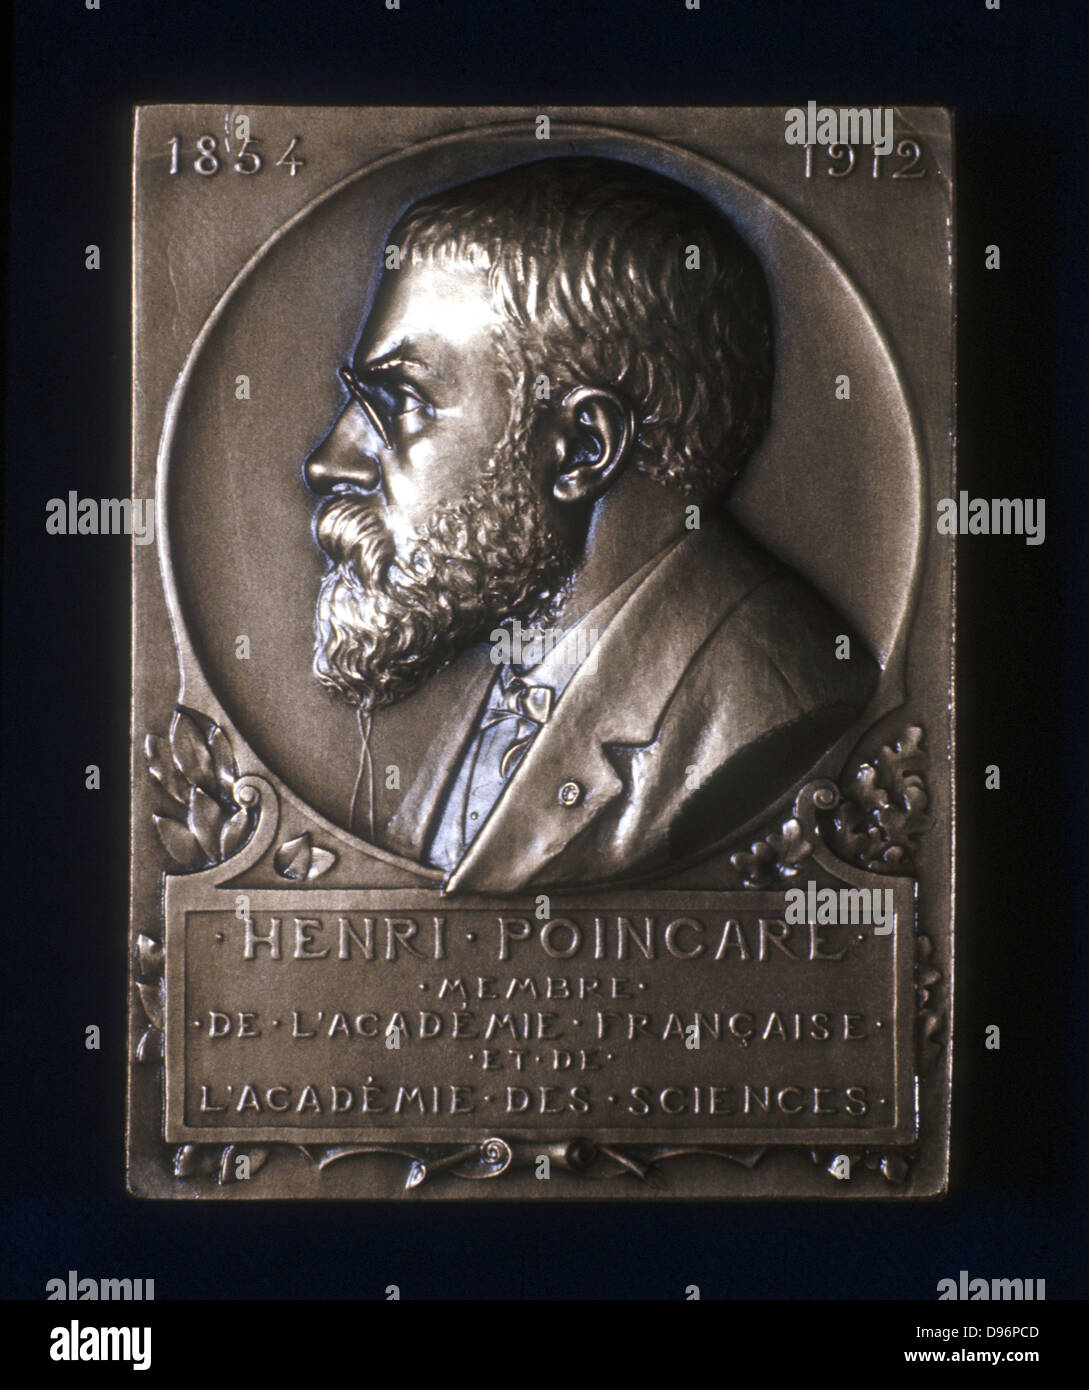 Plaquette commemorating the death of Henri Poincare, French mathematician and philosopher, 1912. Poincare (1854-1912) is best remembered for his work on topology and celestial mechanics. Stock Photo